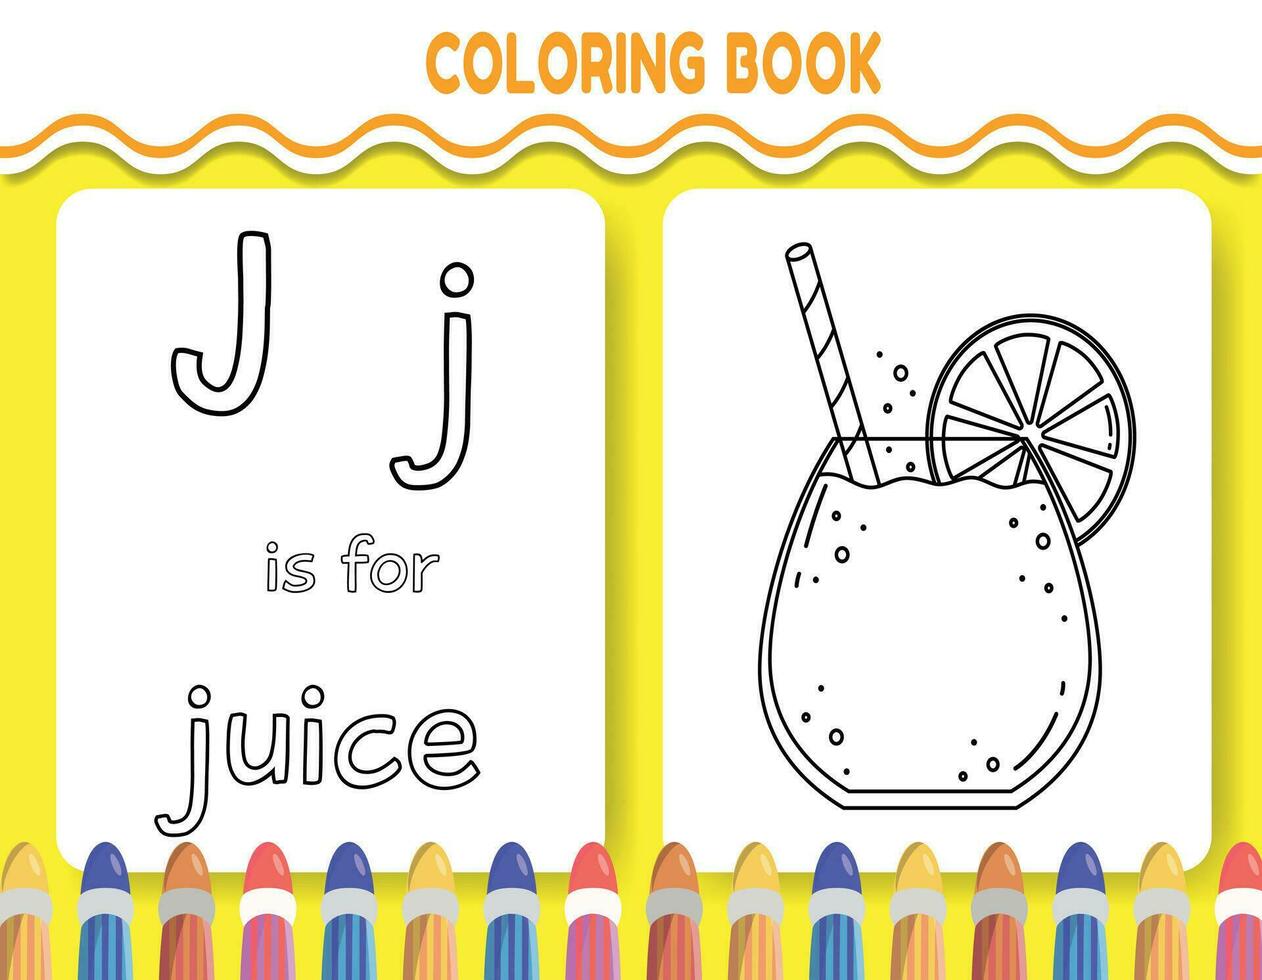 Kids alphabet coloring book page with outlined clipart to color. The letter J is for juice. vector